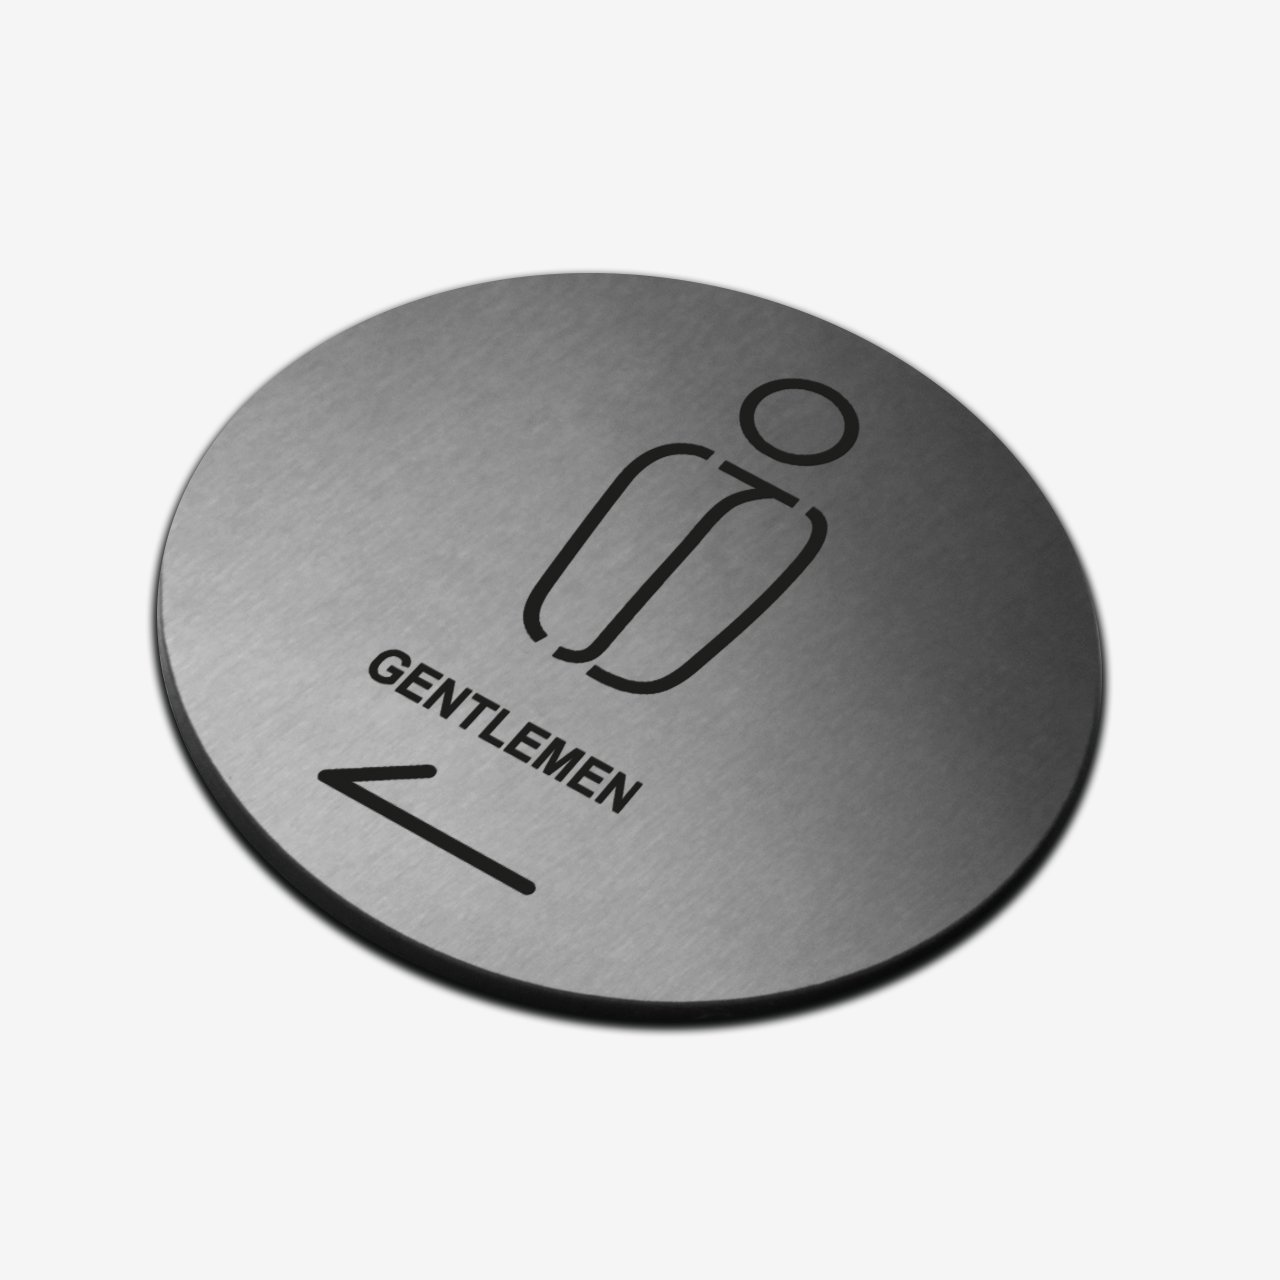 Gentleman WC - Stainless Steel Sign Bathroom Signs circle Bsign